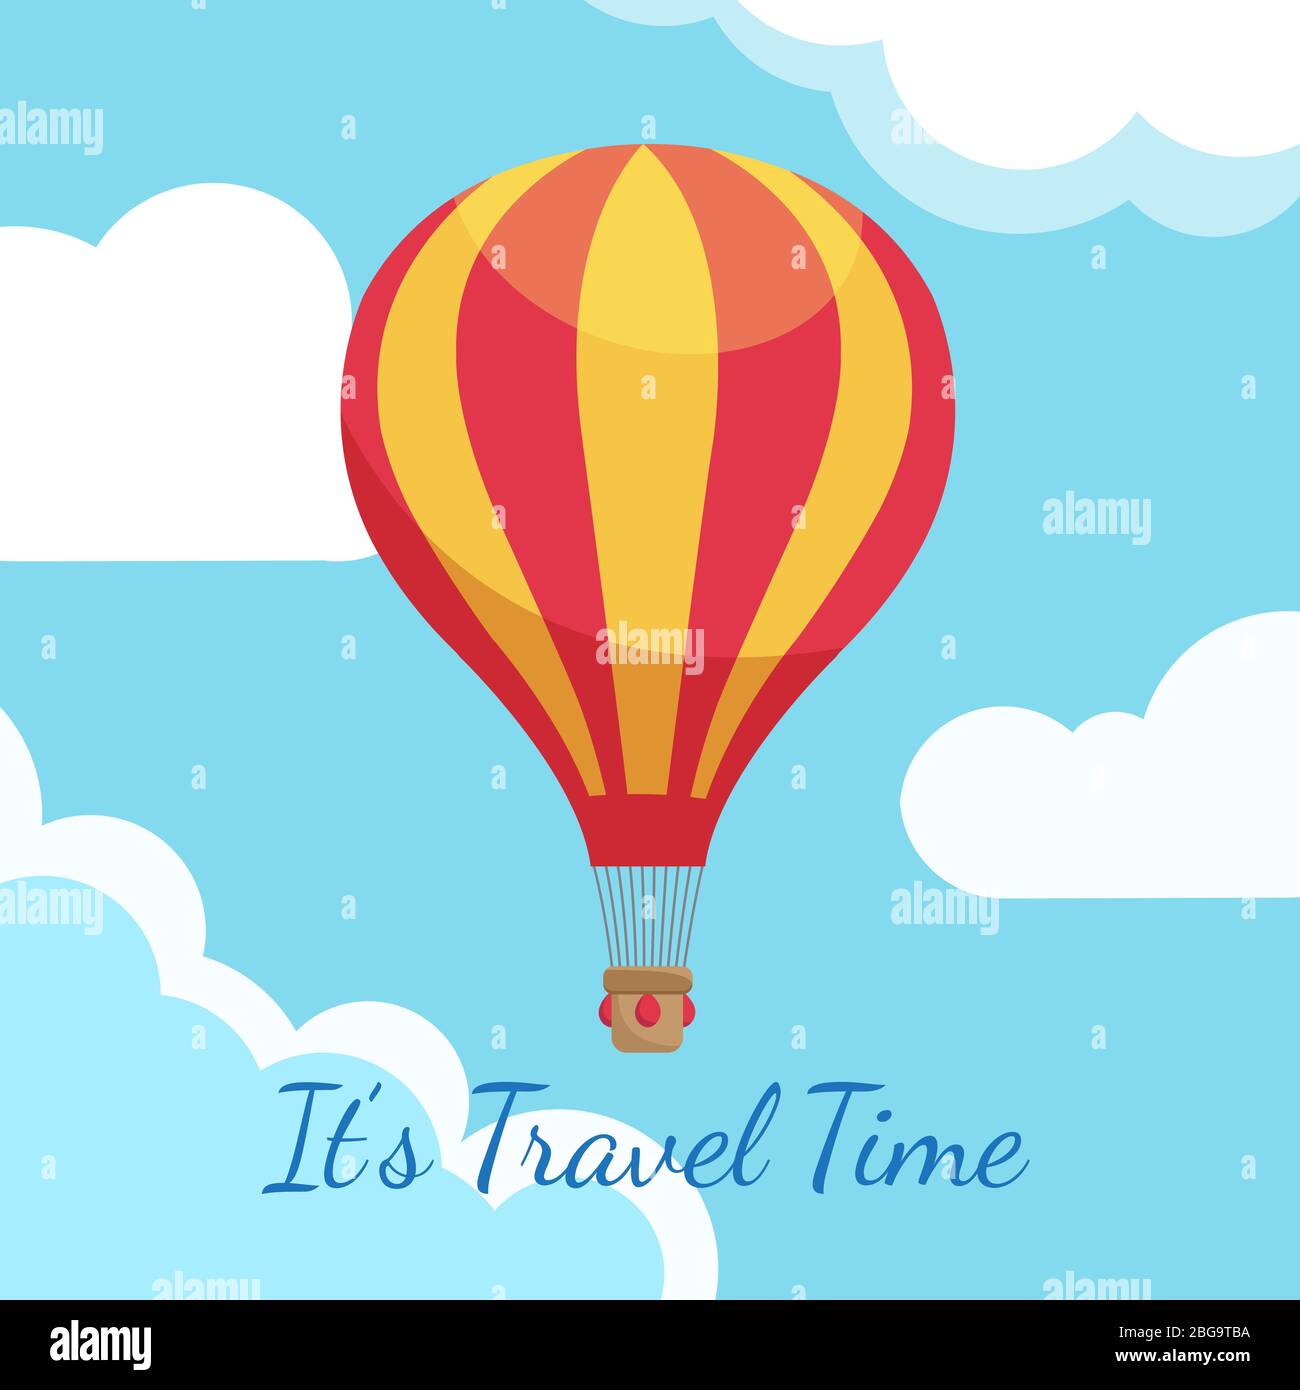 Cartoon hot air balloons in blue sky with clouds vector illustration. Air balloon in blue sky, travel time banner Stock Vector